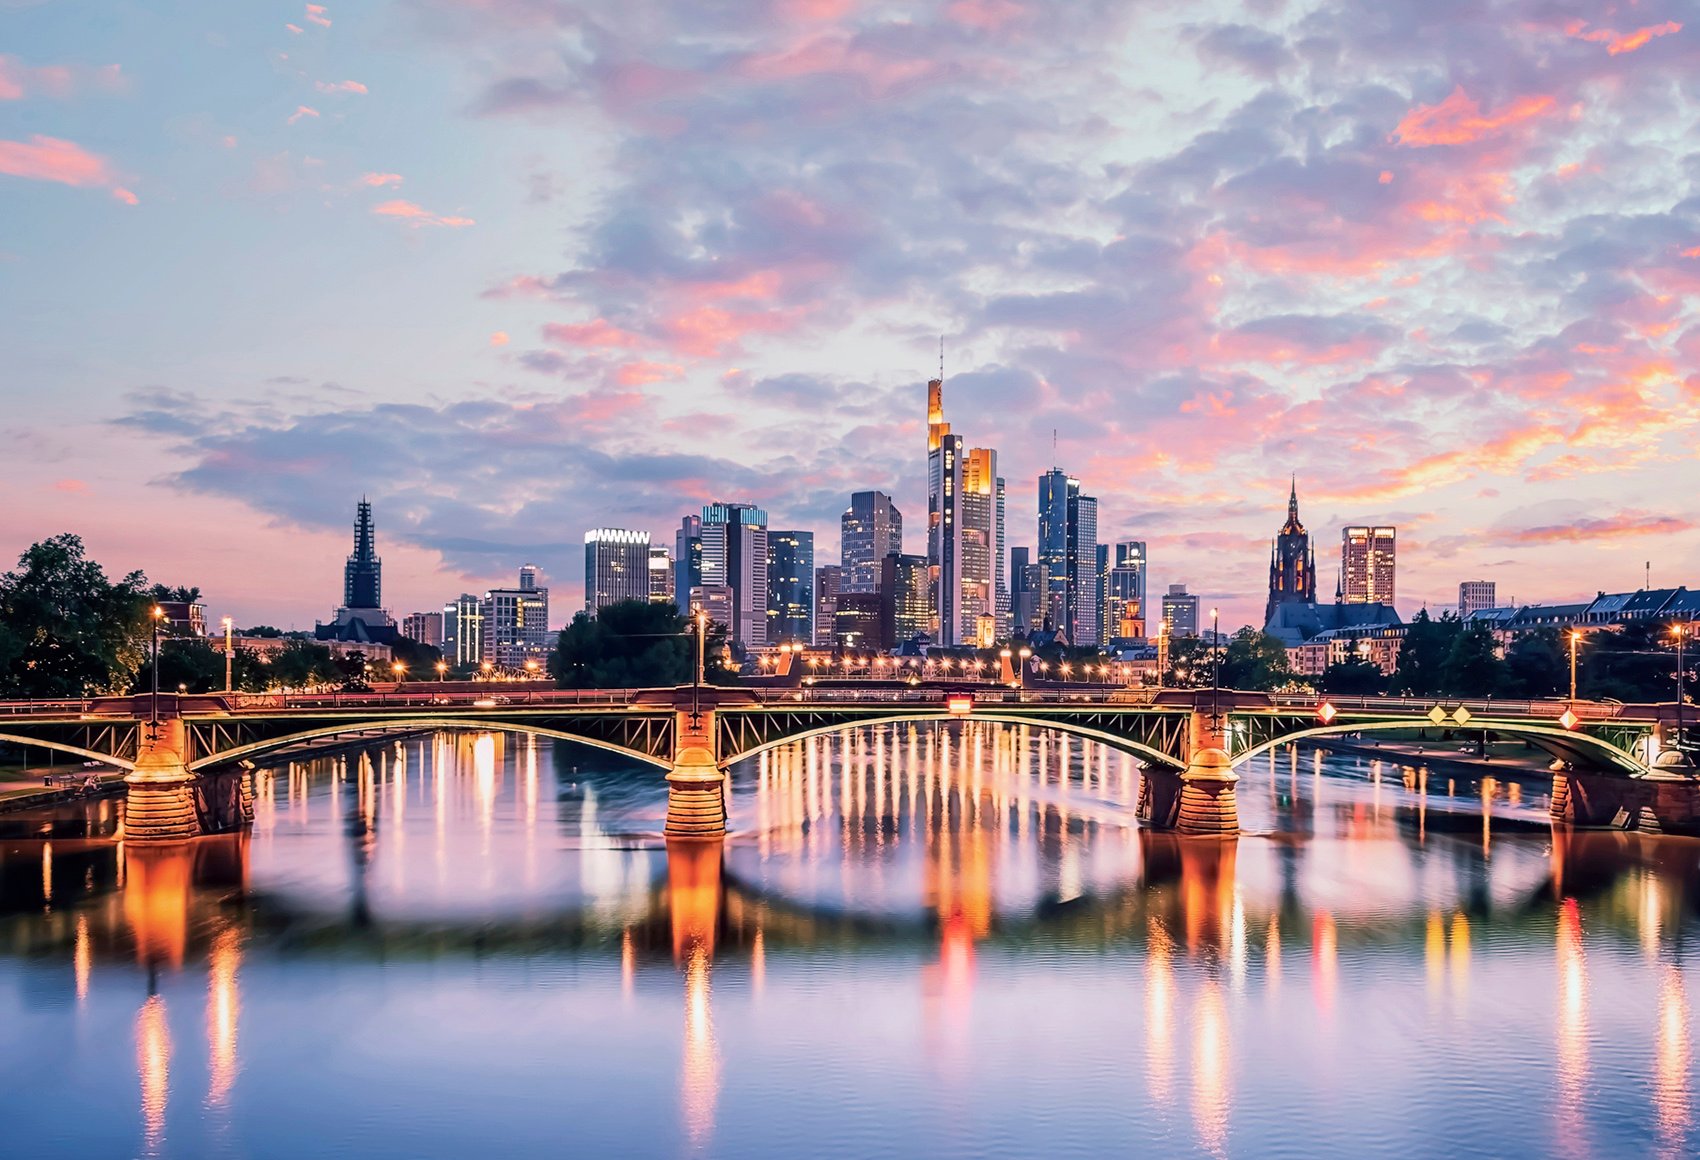 View of Frankfurt am Main skyline and the Main river at sunset